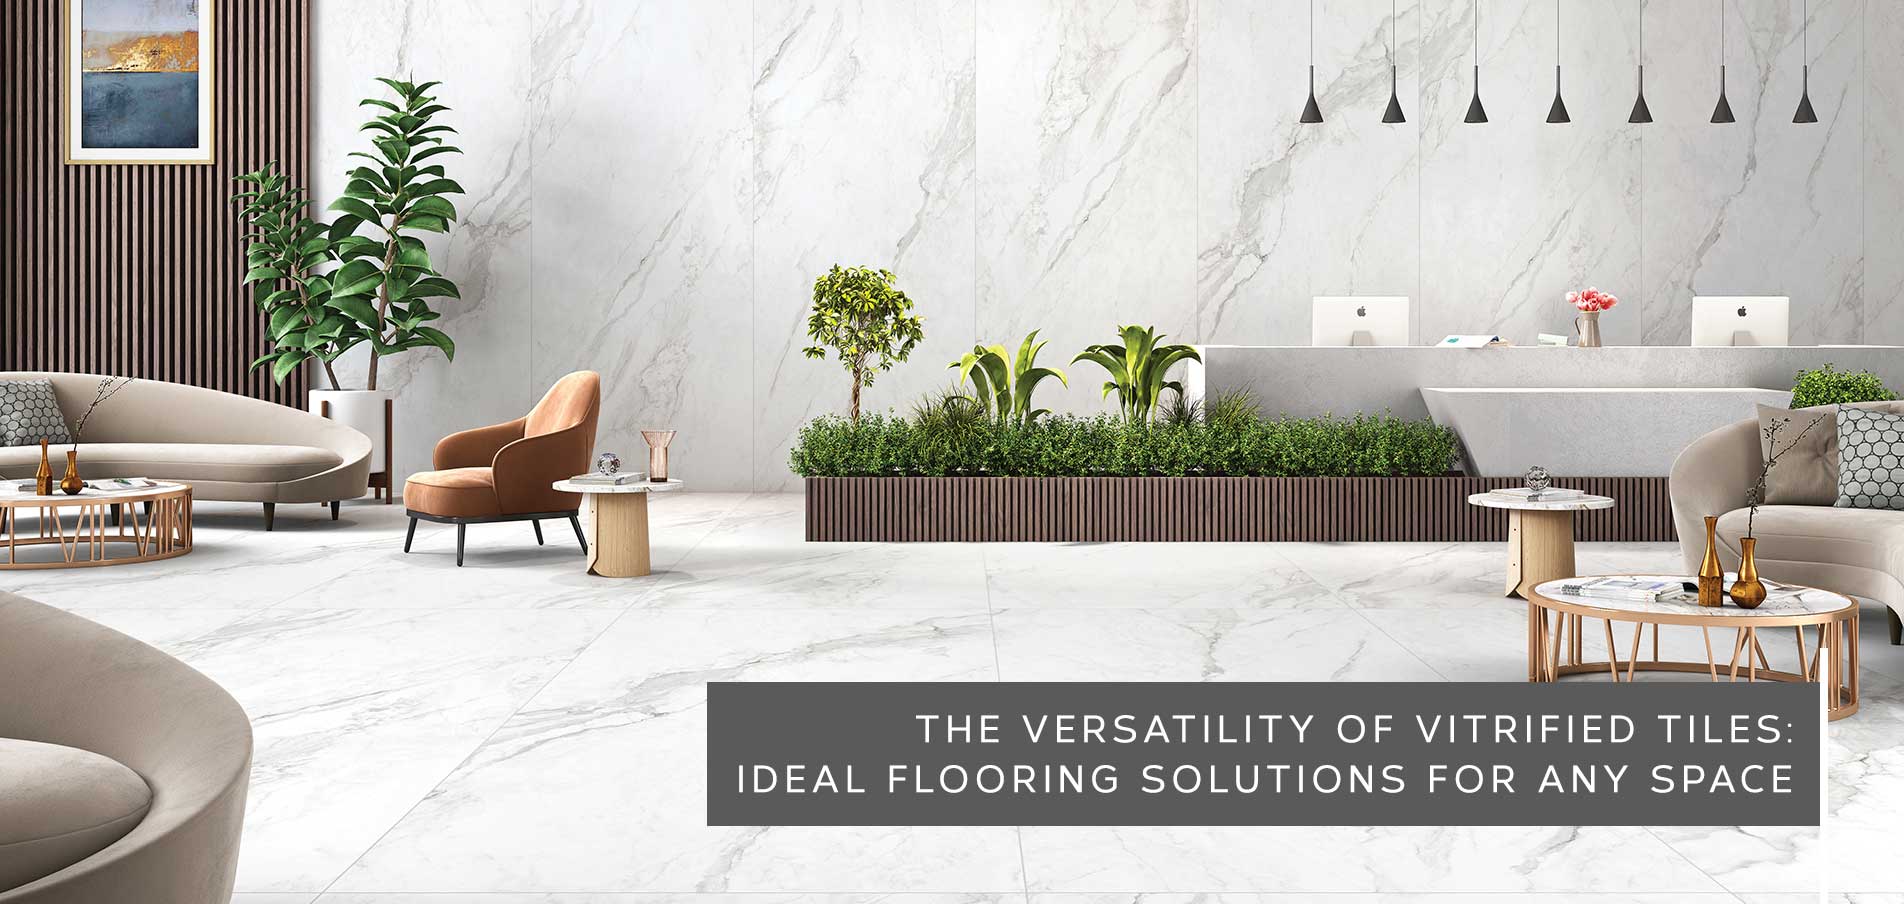 The Versatility of Vitrified Tiles: Ideal Flooring Solutions for Any Space